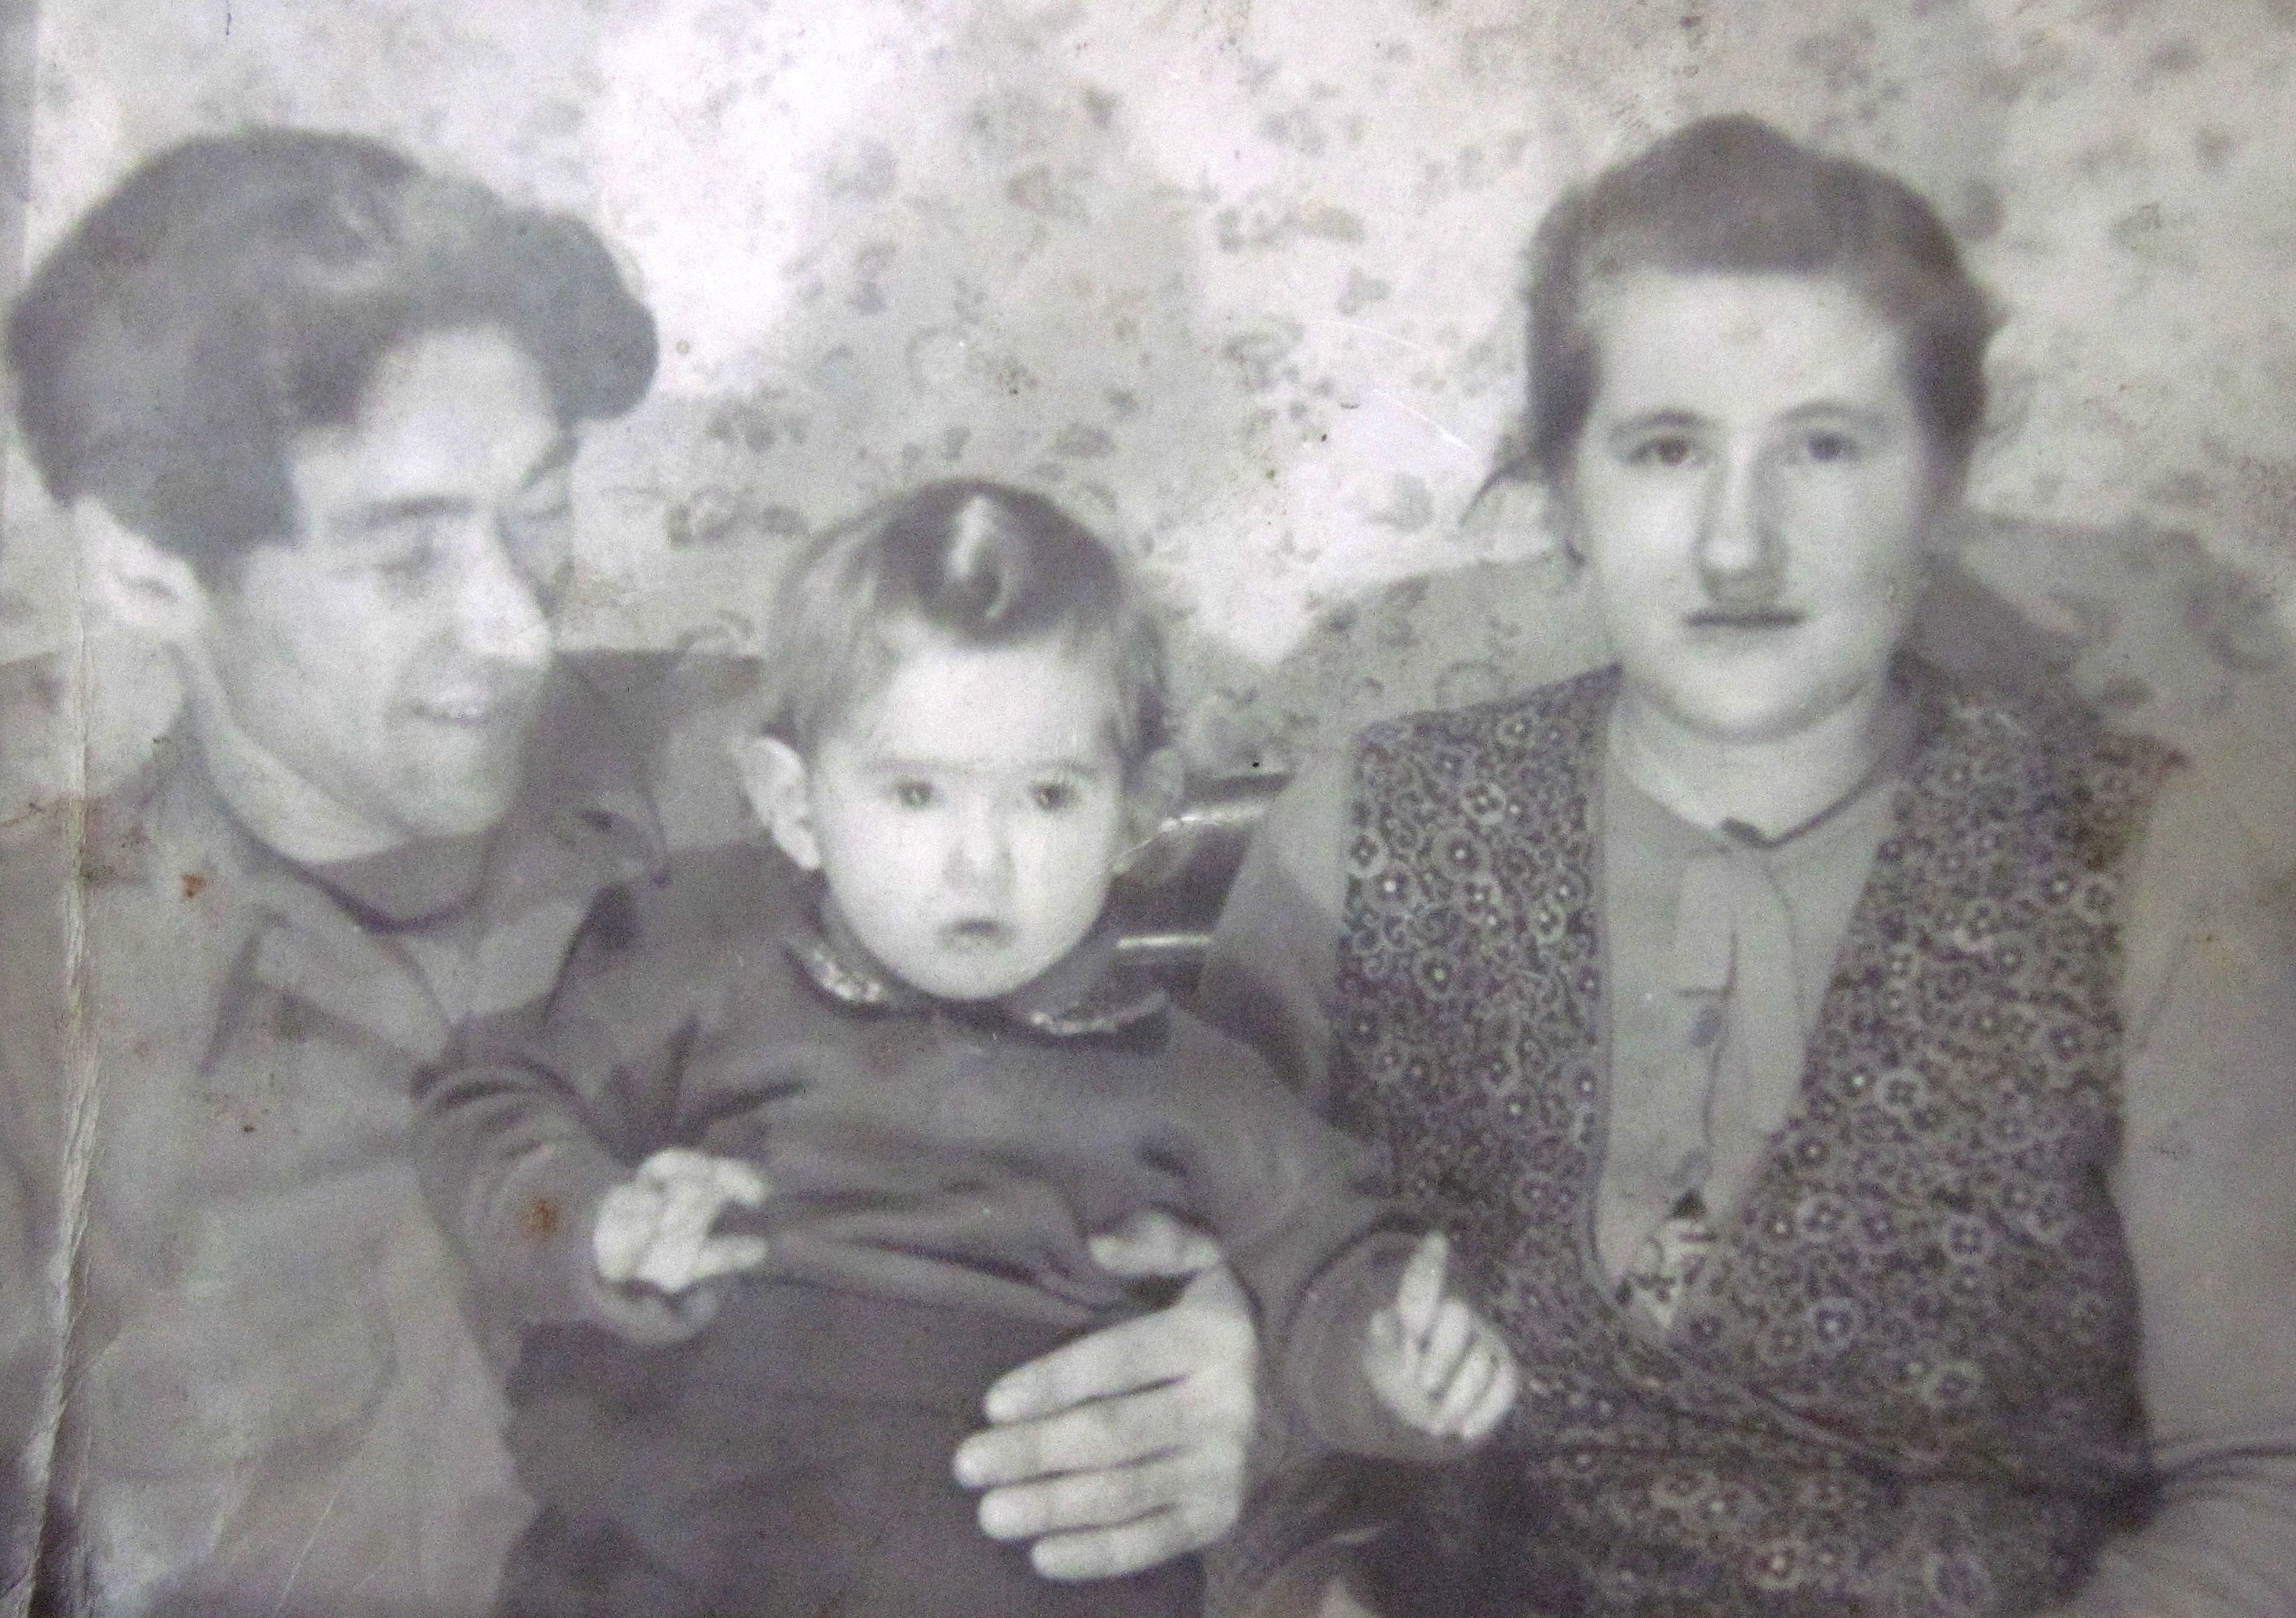 Ivan, Jerry and Olga Prytulak in the 1950s.